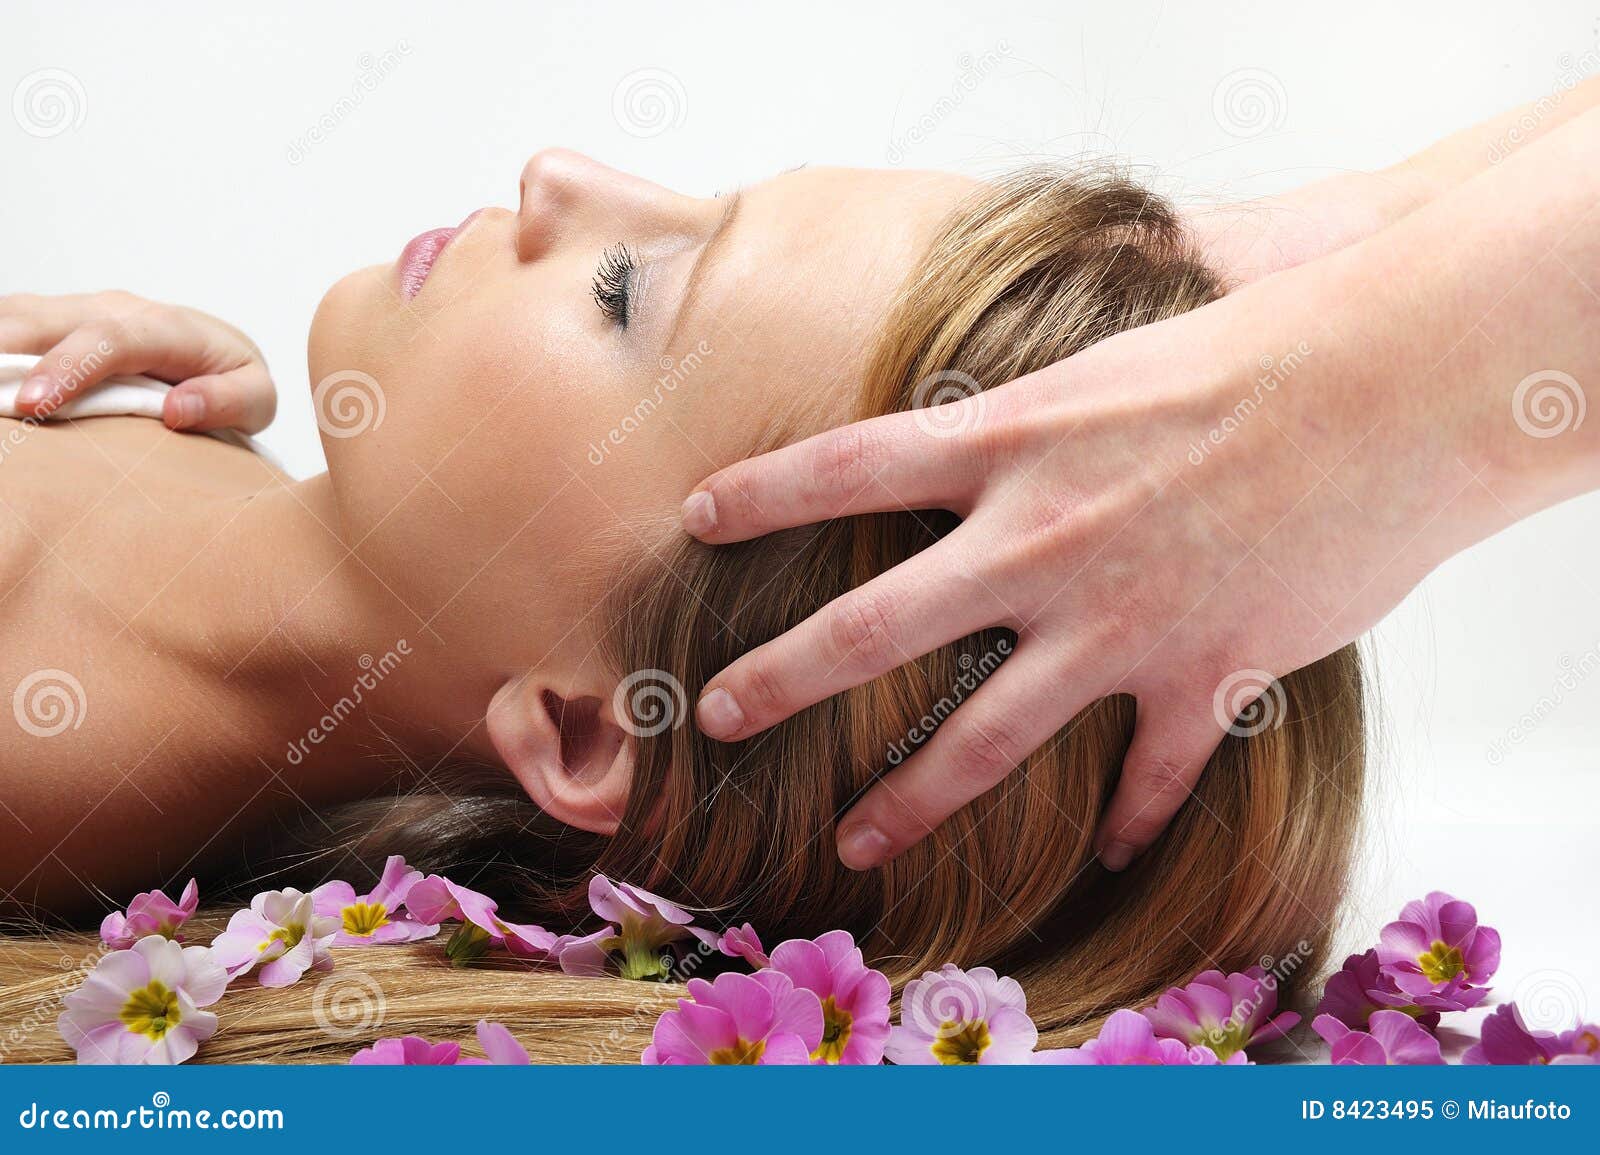 Beautiful Girl Having Massage In Spa Picture Image 8423495